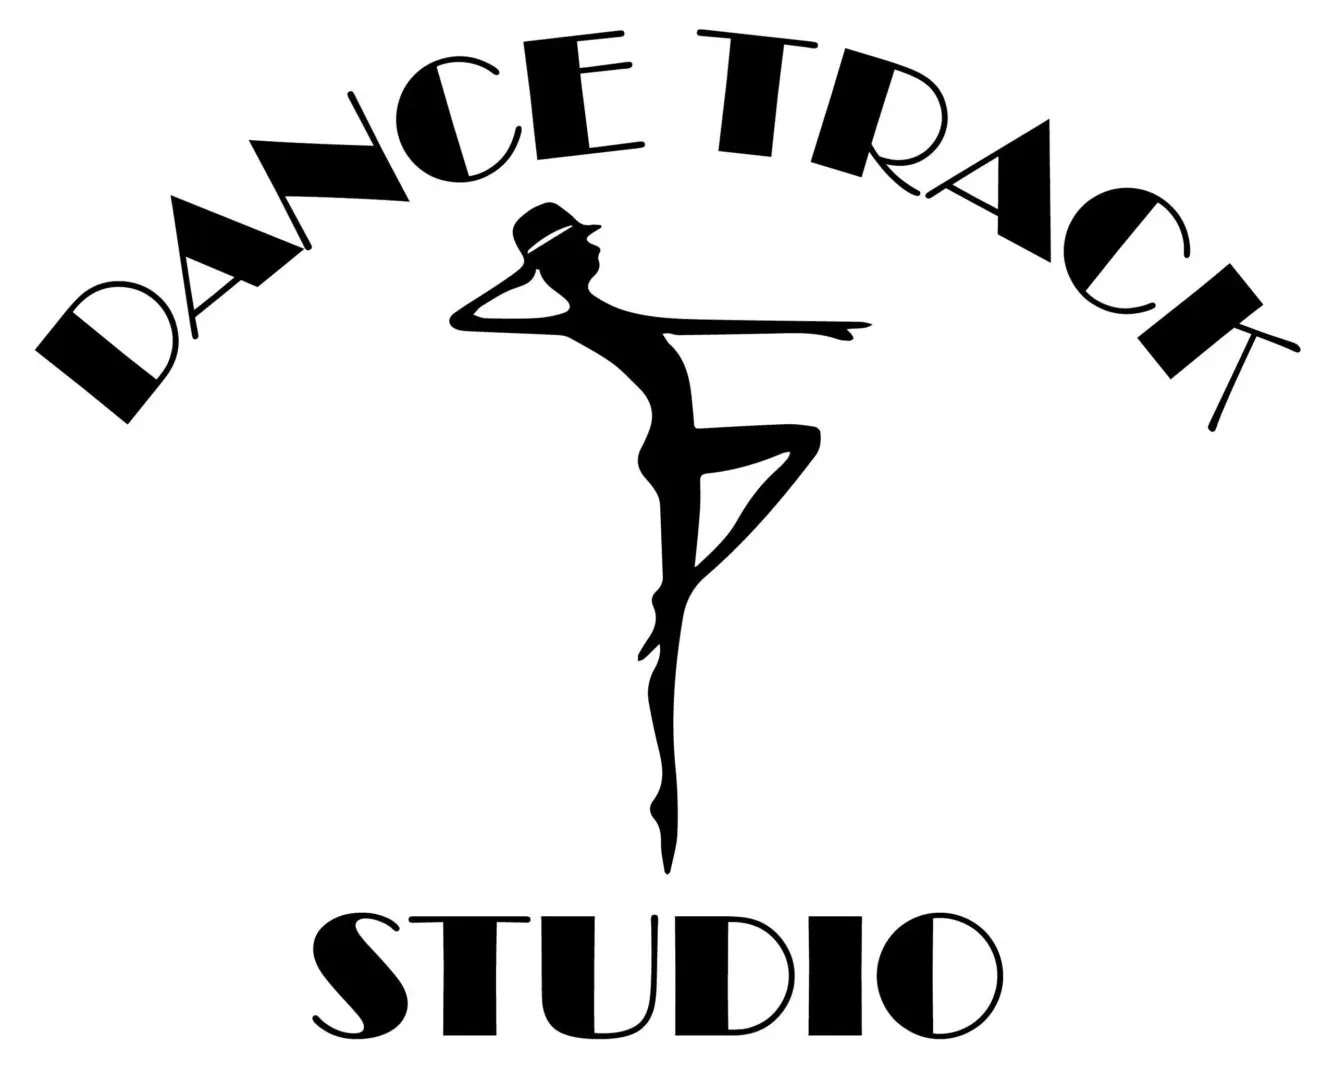 A black and white logo of a dance studio.